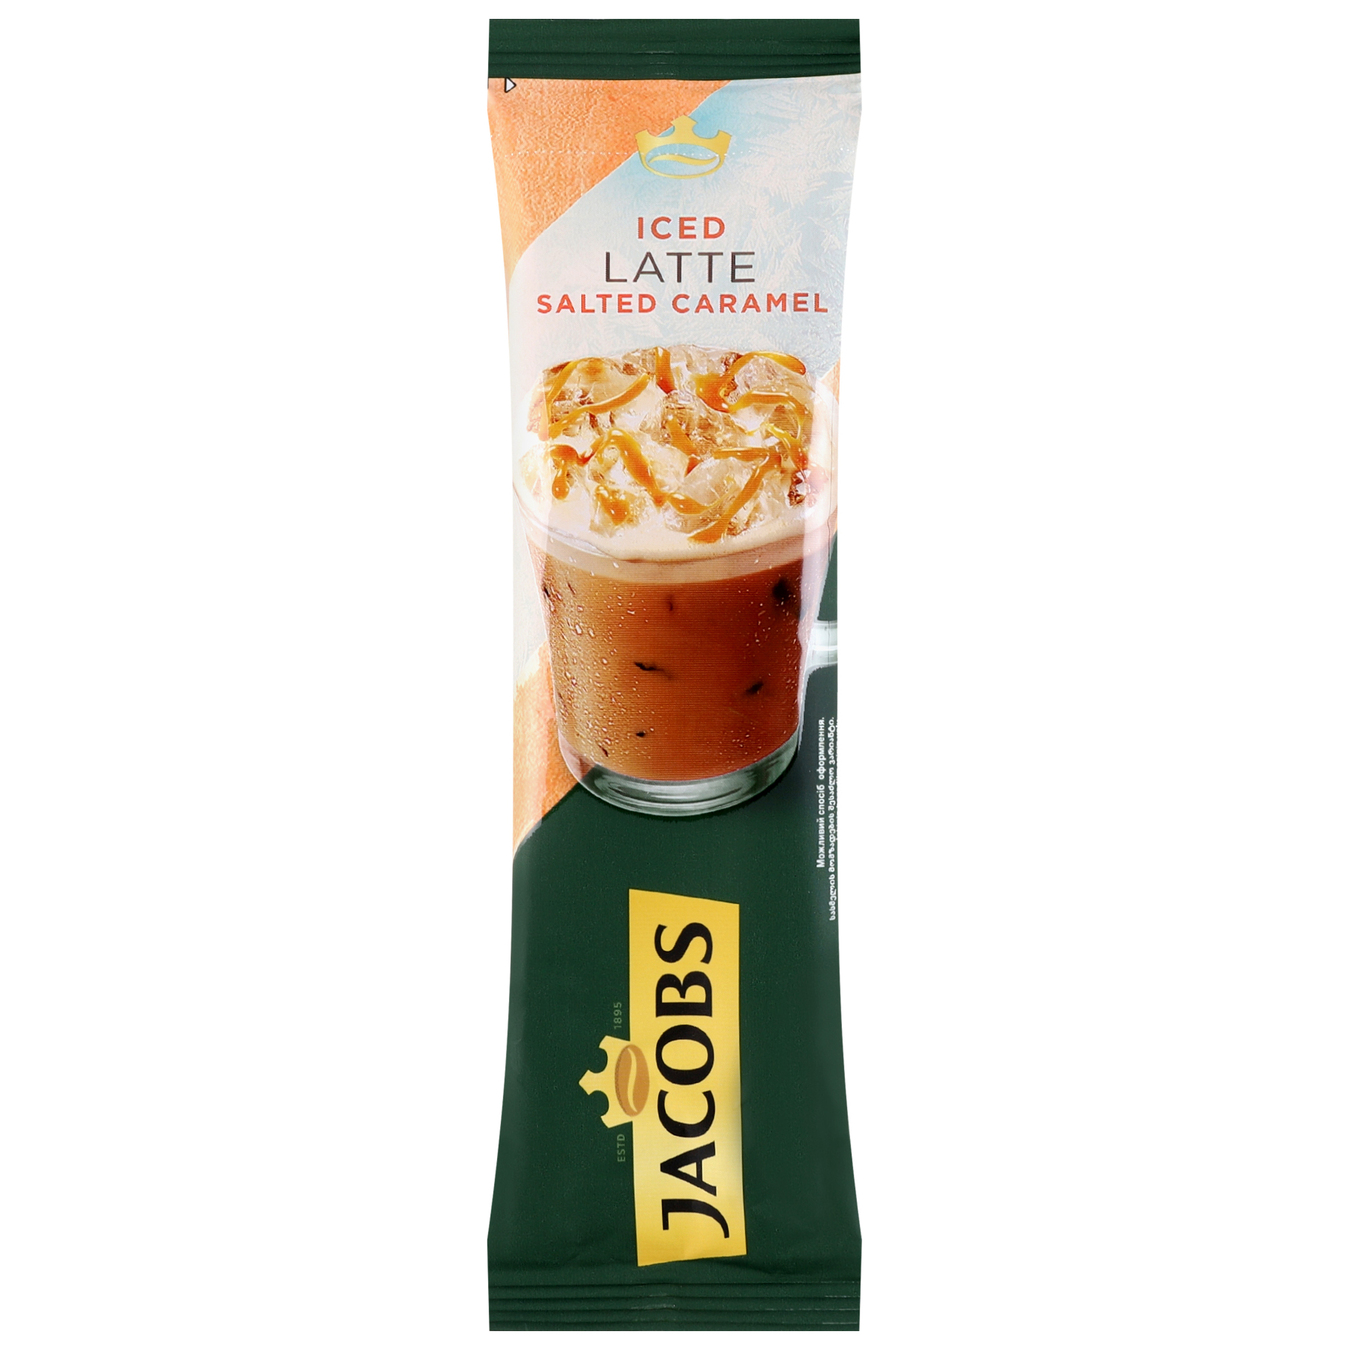 Jacobs 3 in 1 Ice Latte Salted Caramel Coffee Drink 21,3g